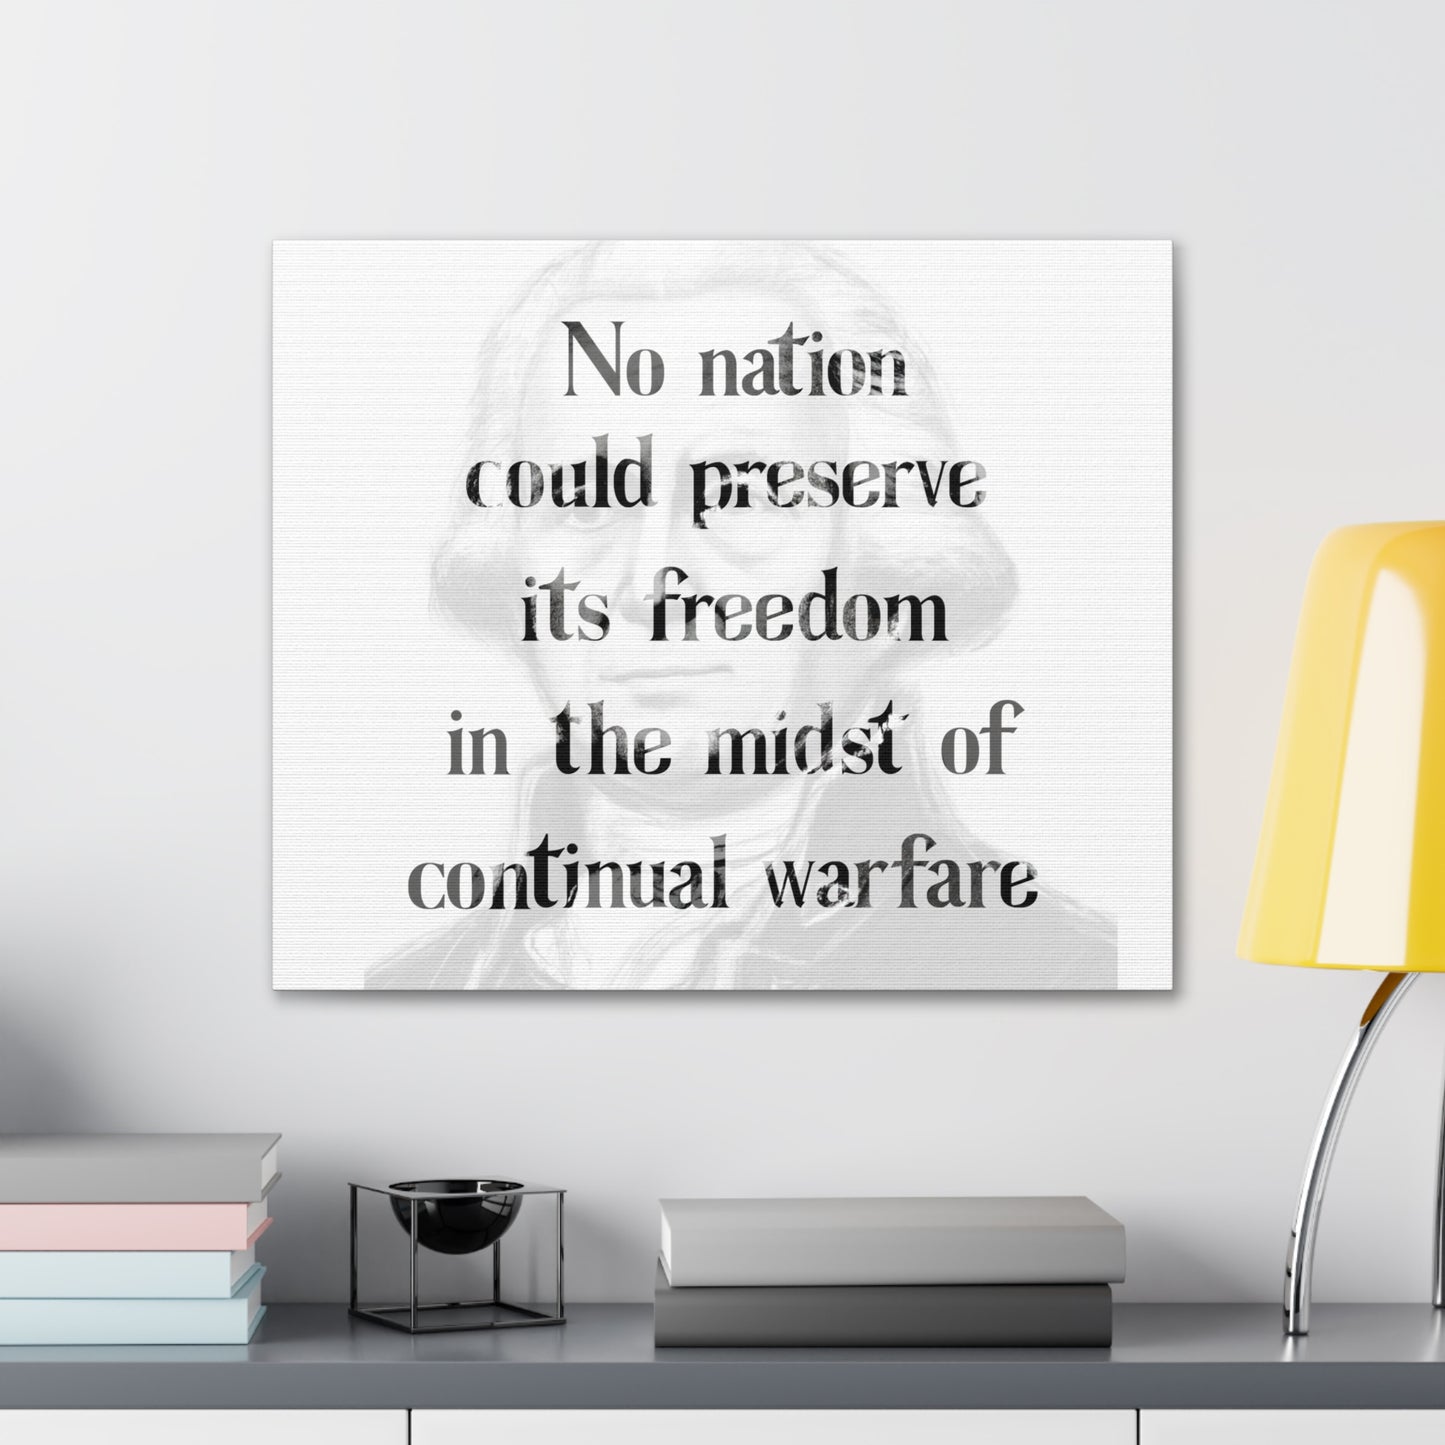 James Madison Quote 1, Canvas Art, Horizontal Light Print, 4th President of the United States, Ocean Art, Sunset, Nature, Political Art, Canvas Prints, Presidential Quotes, Inspirational Quotes